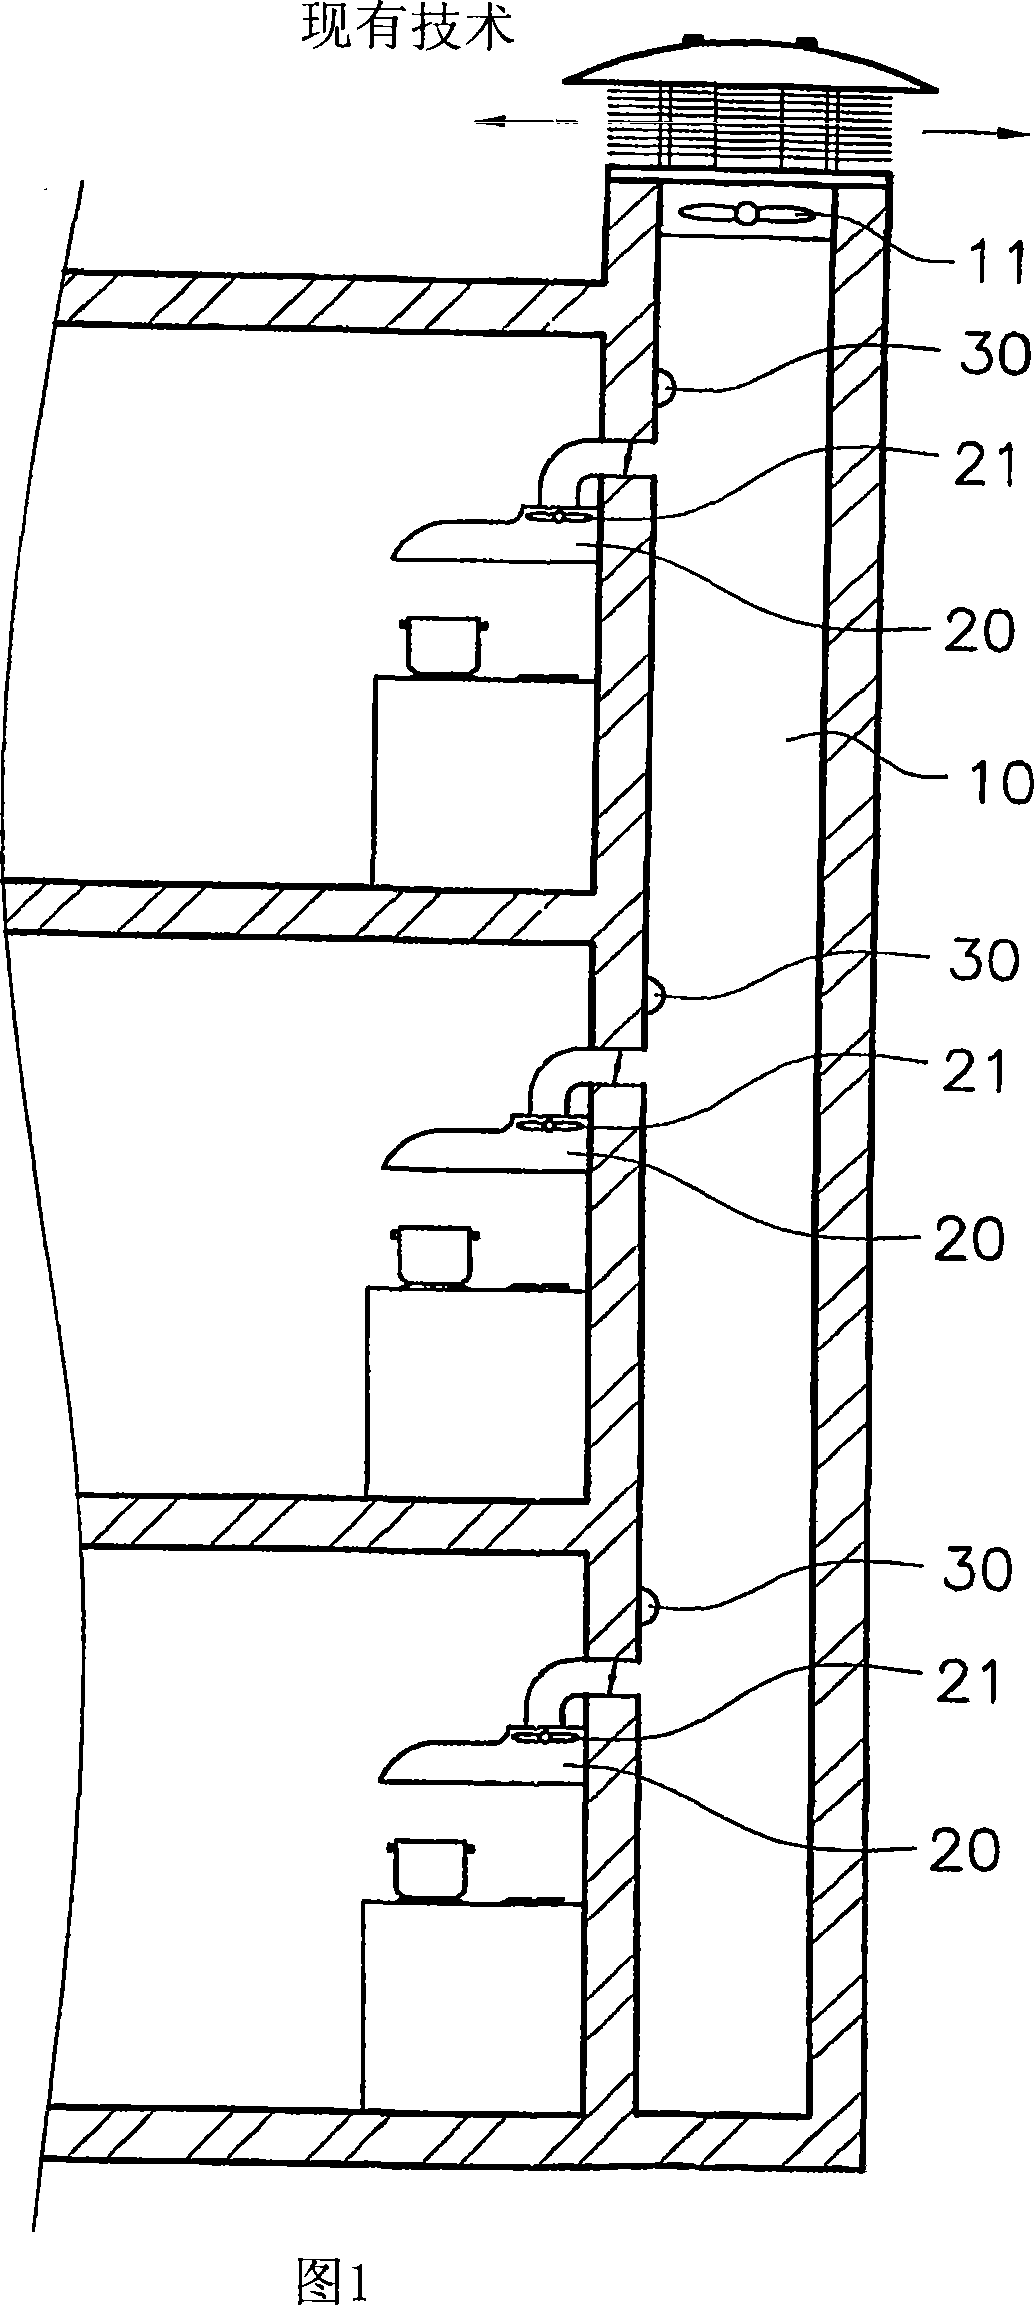 Kitchen ventilation system with fan having positive pressure-to-output characteristic applied thereto